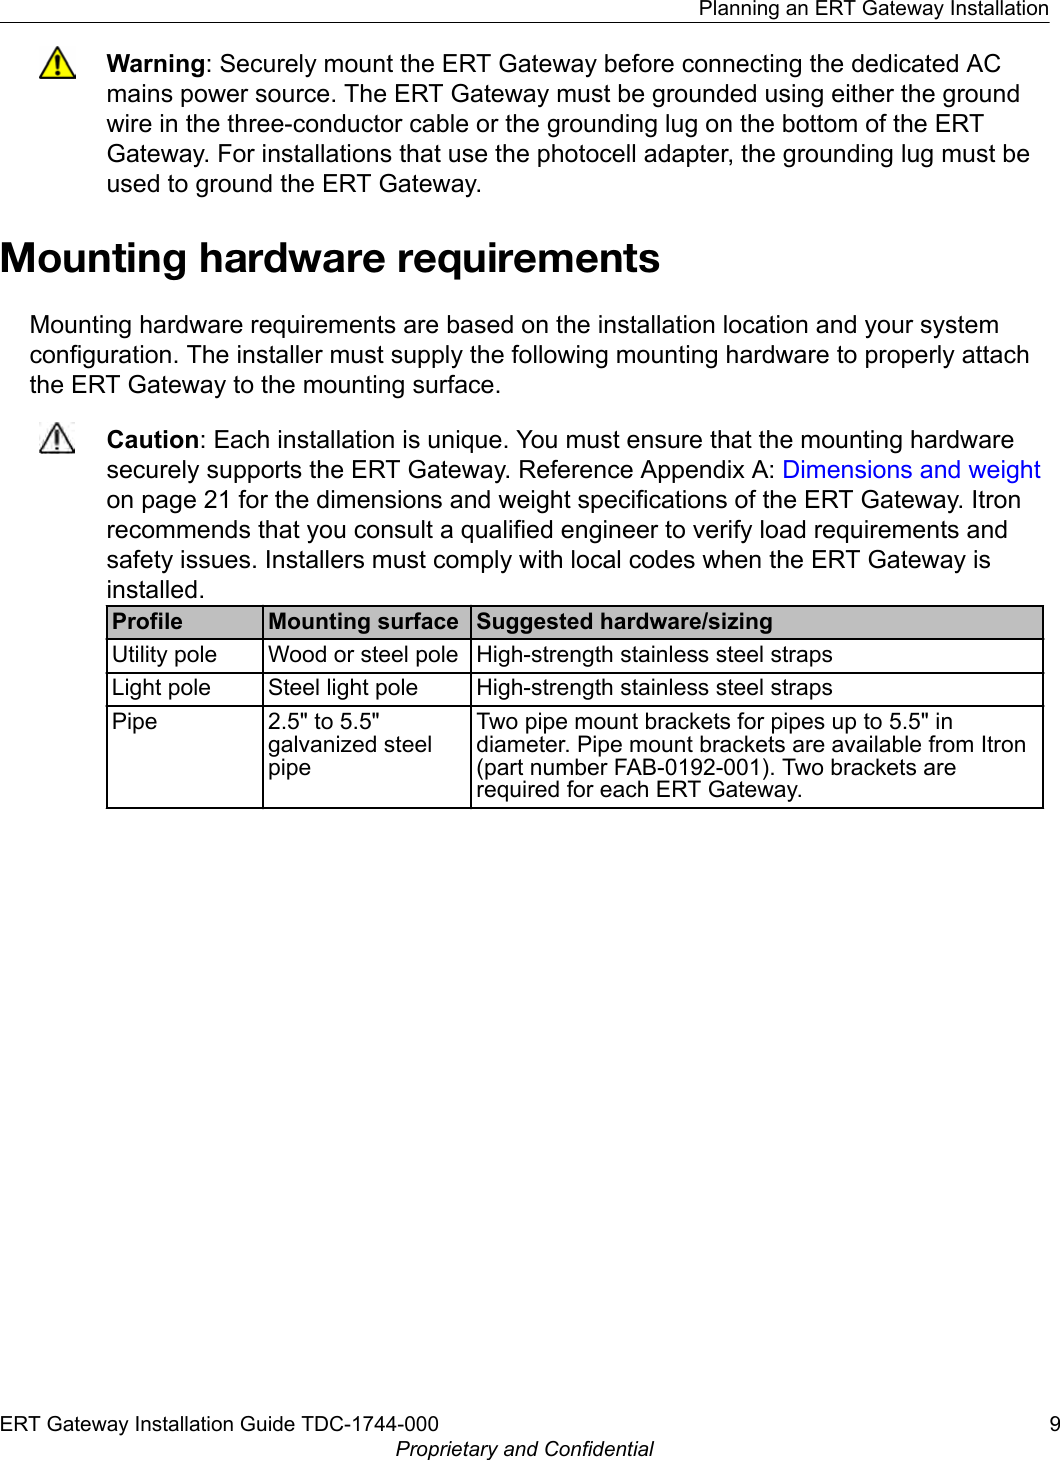 Warning: Securely mount the ERT Gateway before connecting the dedicated ACmains power source. The ERT Gateway must be grounded using either the groundwire in the three-conductor cable or the grounding lug on the bottom of the ERTGateway. For installations that use the photocell adapter, the grounding lug must beused to ground the ERT Gateway.Mounting hardware requirementsMounting hardware requirements are based on the installation location and your systemconfiguration. The installer must supply the following mounting hardware to properly attachthe ERT Gateway to the mounting surface.Caution: Each installation is unique. You must ensure that the mounting hardwaresecurely supports the ERT Gateway. Reference Appendix A: Dimensions and weighton page 21 for the dimensions and weight specifications of the ERT Gateway. Itronrecommends that you consult a qualified engineer to verify load requirements andsafety issues. Installers must comply with local codes when the ERT Gateway isinstalled.Profile Mounting surface Suggested hardware/sizingUtility pole Wood or steel pole High-strength stainless steel strapsLight pole Steel light pole High-strength stainless steel strapsPipe 2.5&quot; to 5.5&quot;galvanized steelpipeTwo pipe mount brackets for pipes up to 5.5&quot; indiameter. Pipe mount brackets are available from Itron(part number FAB-0192-001). Two brackets arerequired for each ERT Gateway.Planning an ERT Gateway InstallationERT Gateway Installation Guide TDC-1744-000 9Proprietary and Confidential